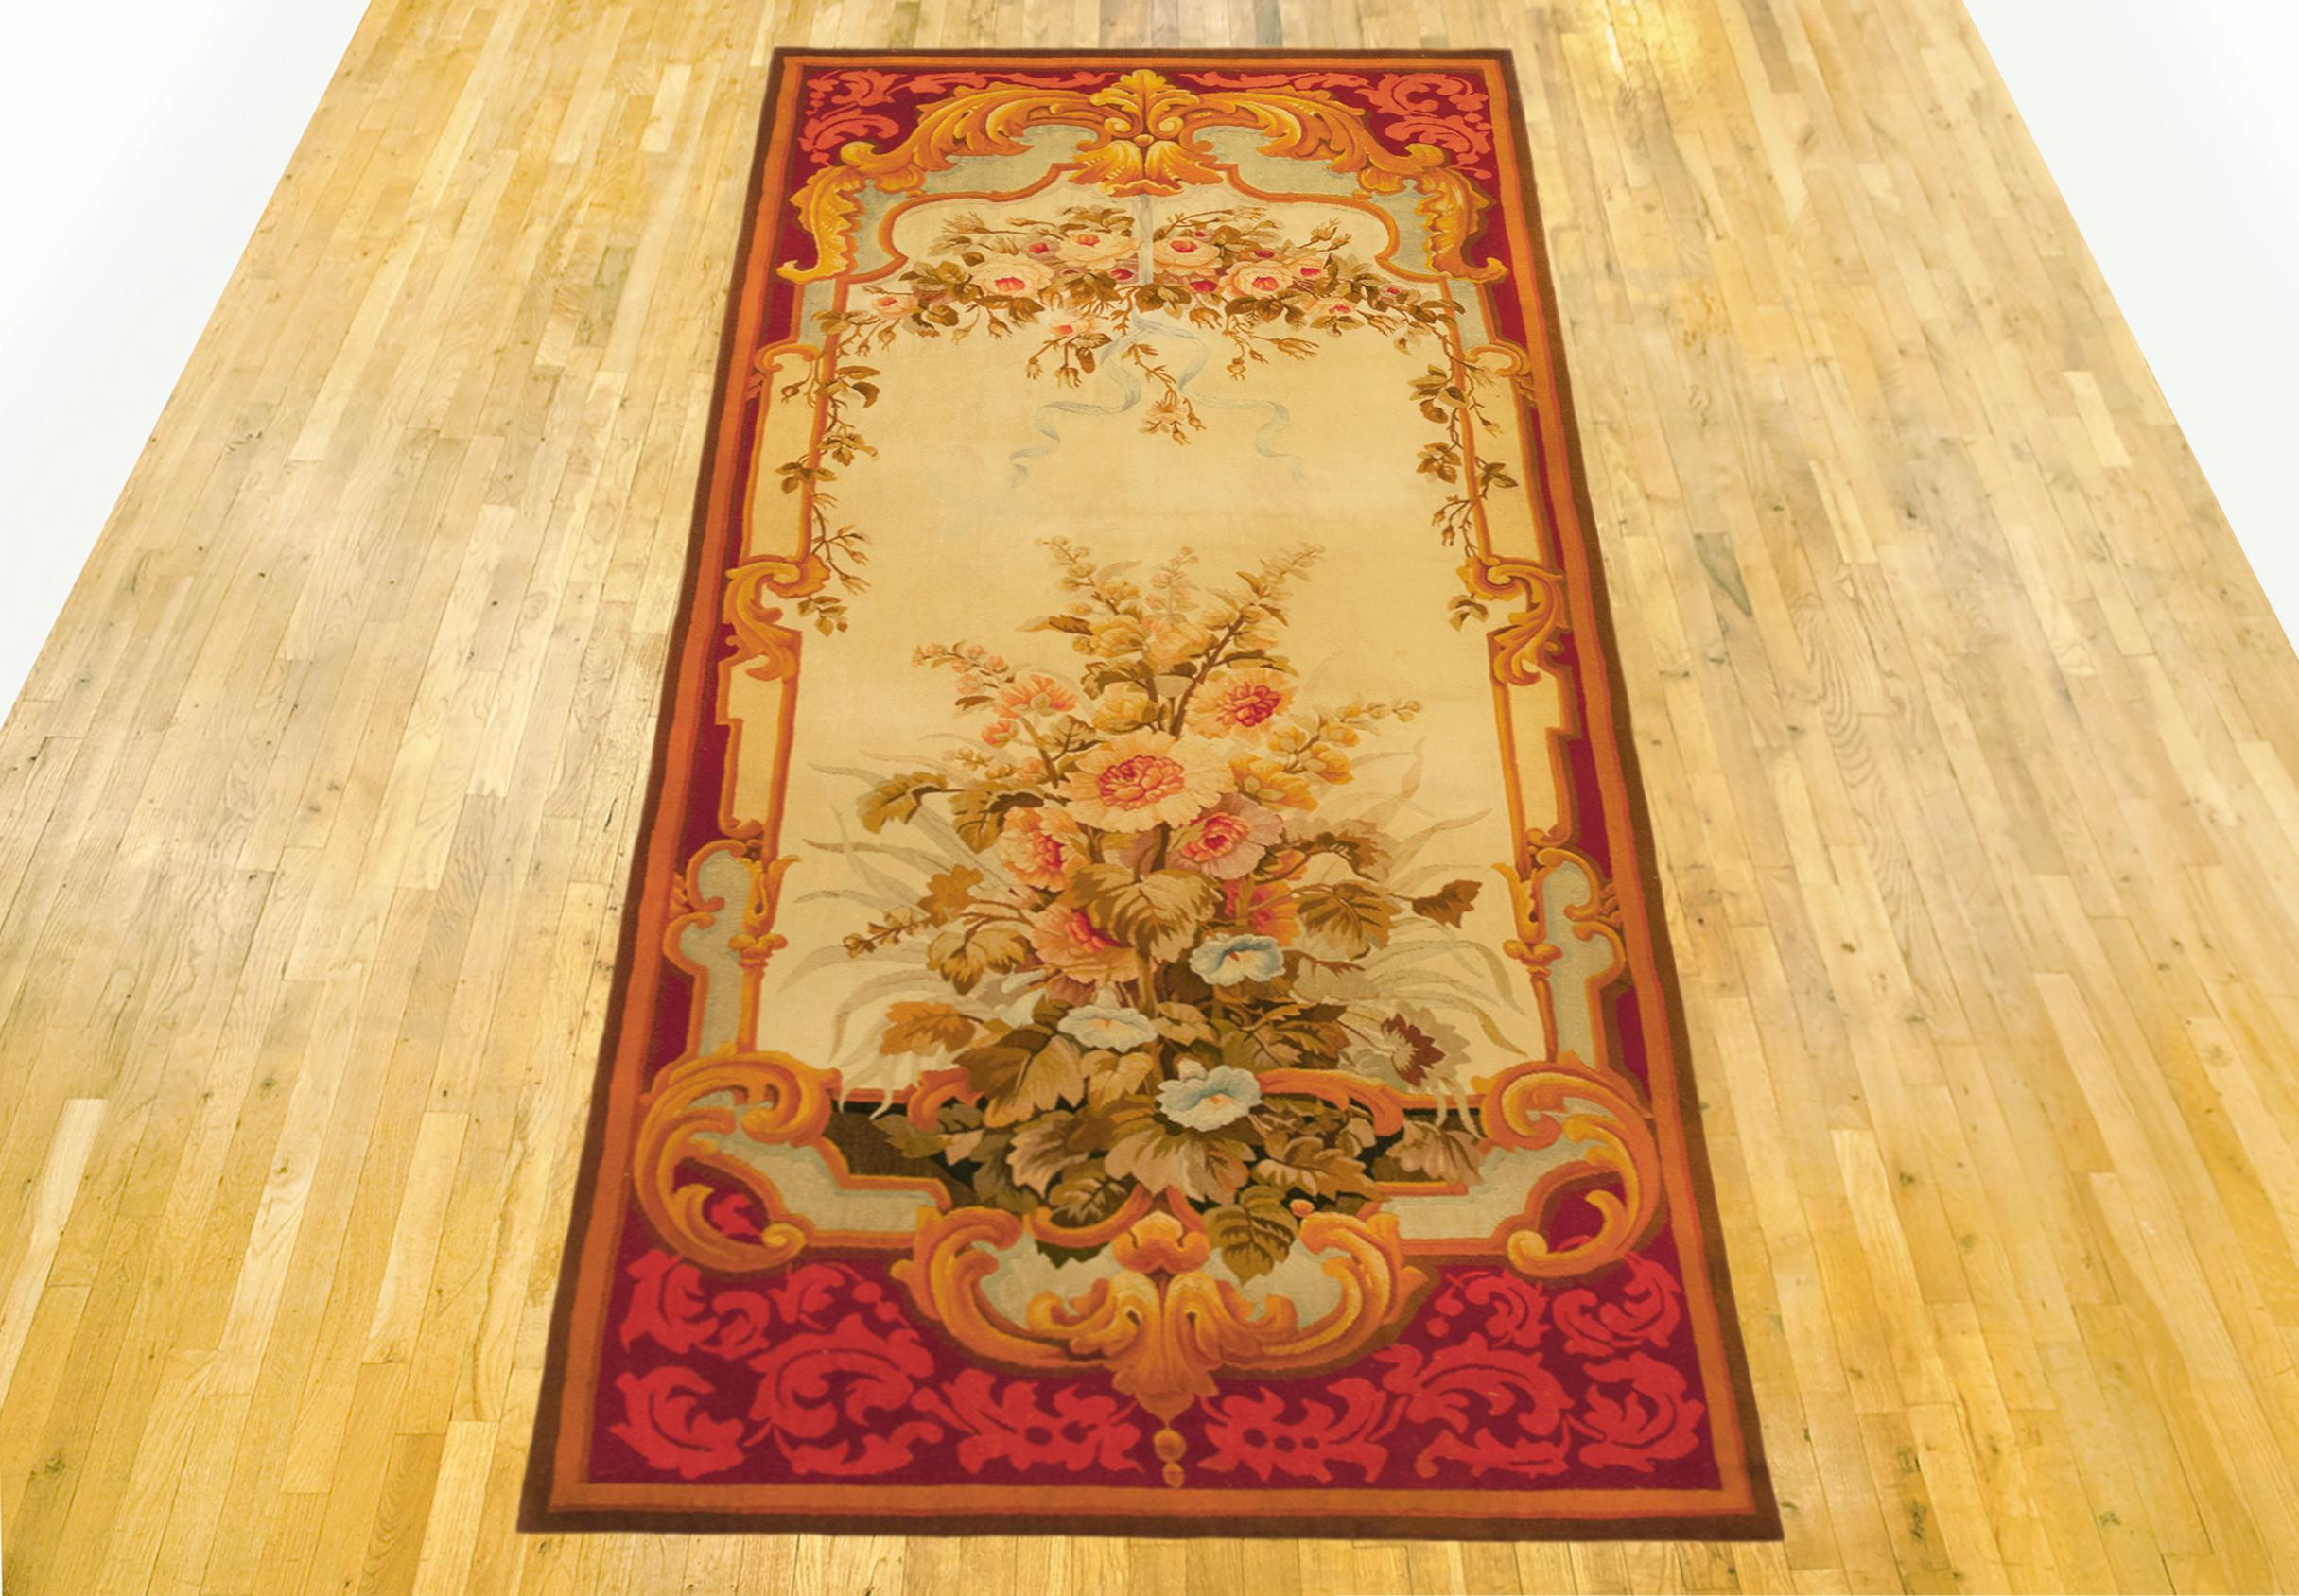 Antique French Aubusson Rug, Runner size, circa 1890

A one-of-a-kind antique French Aubusson Carpet, hand-knotted with soft wool pile. This lovely hand-knotted wool carpet features floral elements in a directional design on the ivory primary field,